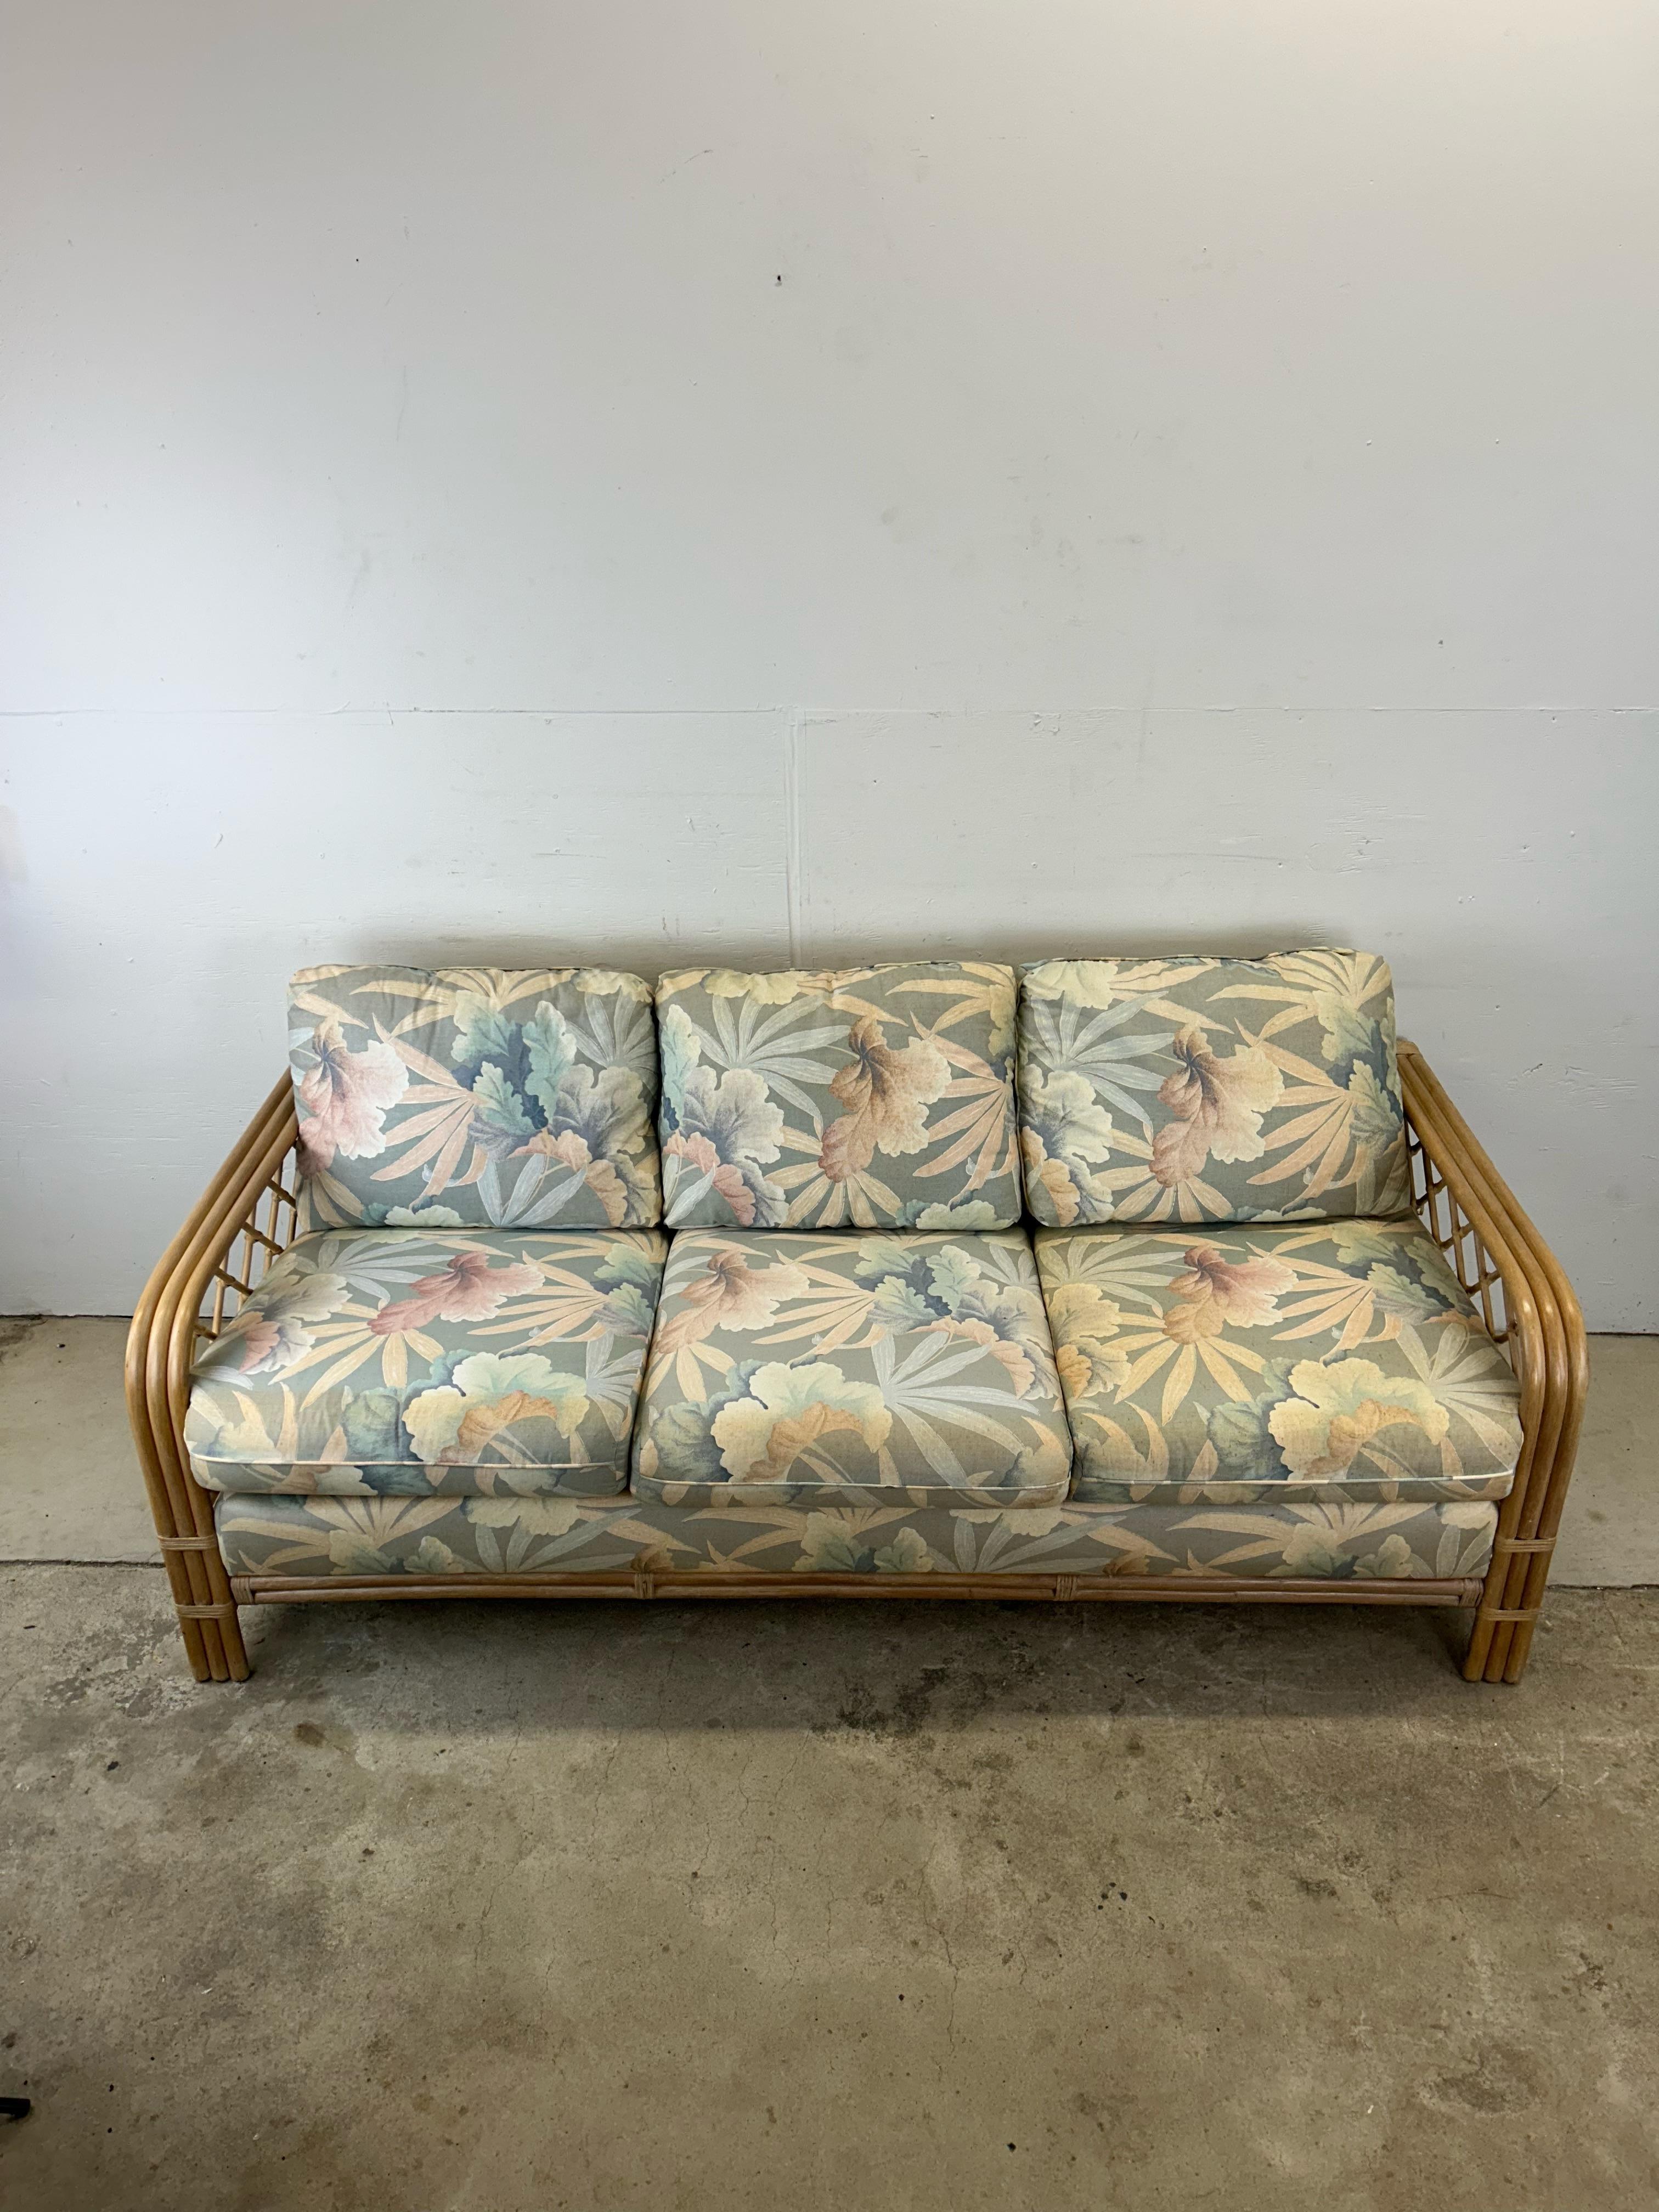 Vintage Boho Chic Rattan 3 Seater Sofa with Floral Upholstery For Sale 7